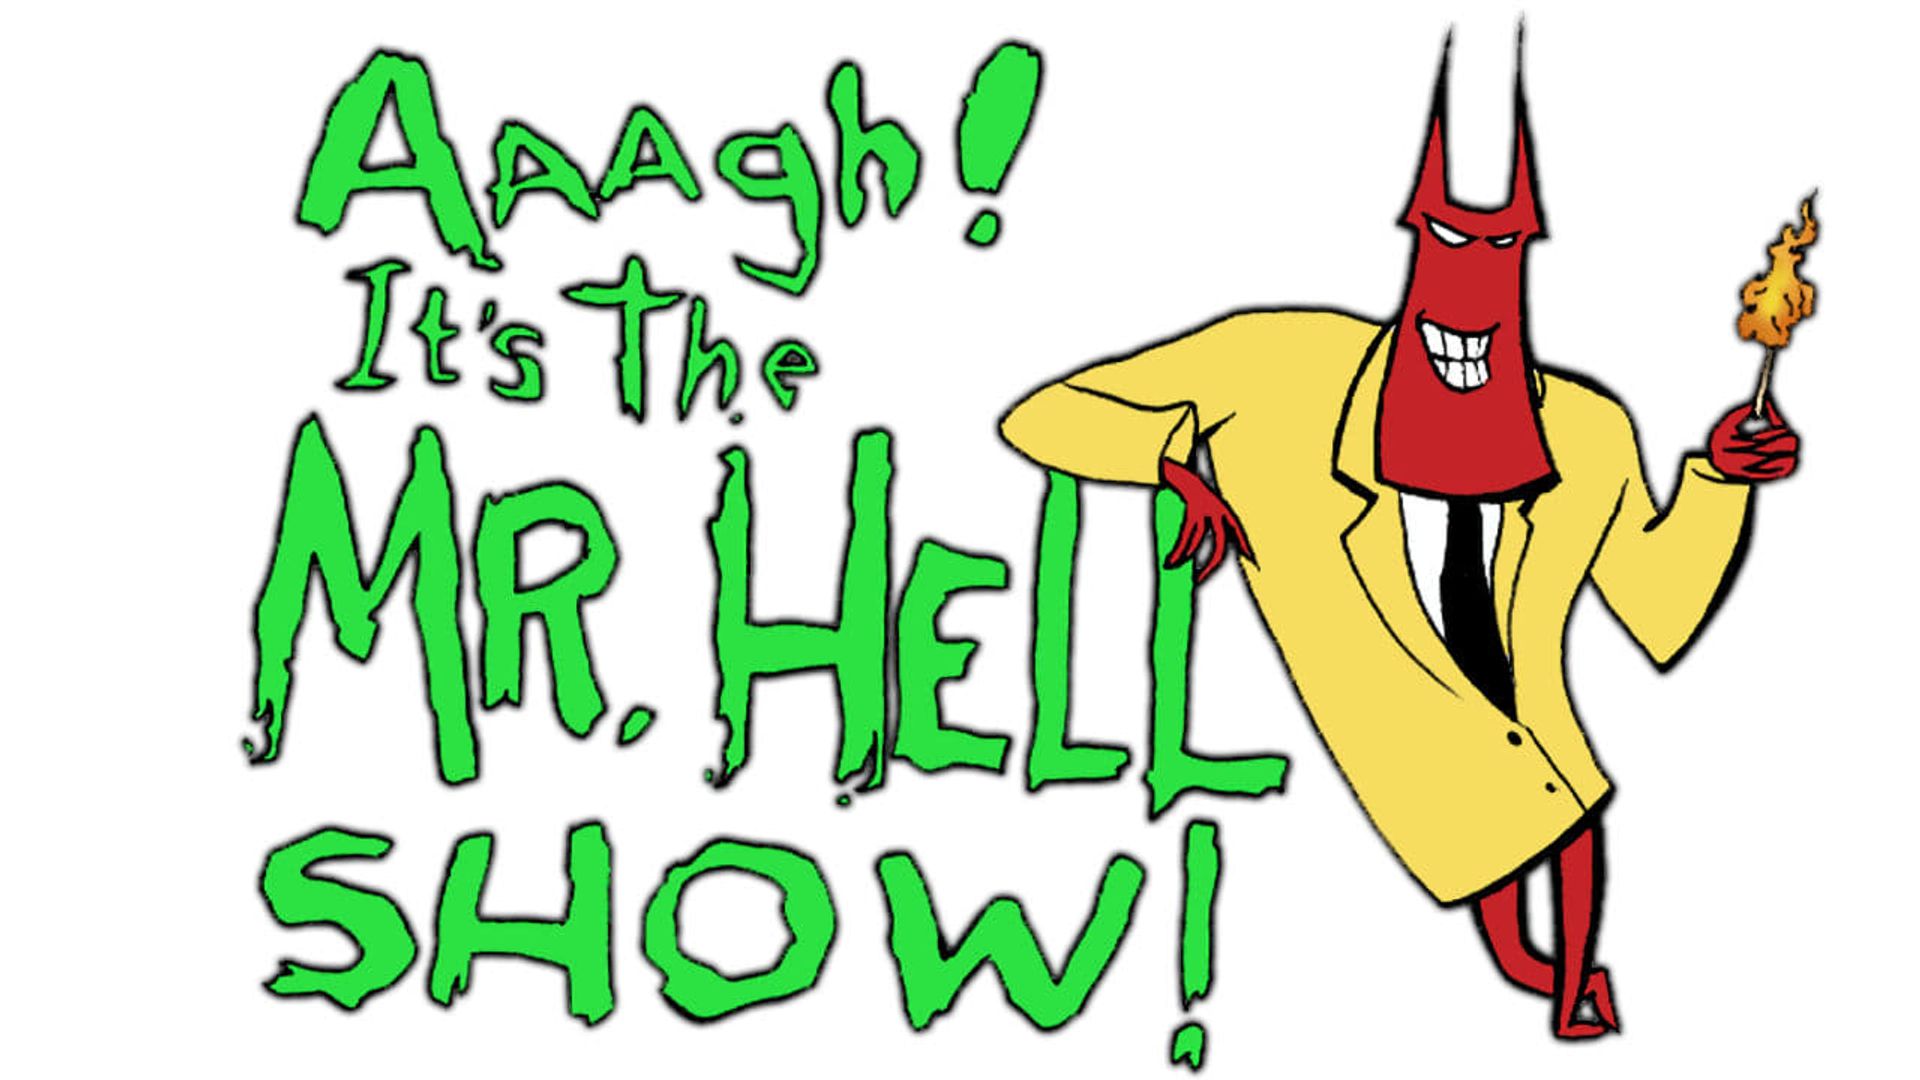 Aaagh! It's the Mr. Hell Show! background